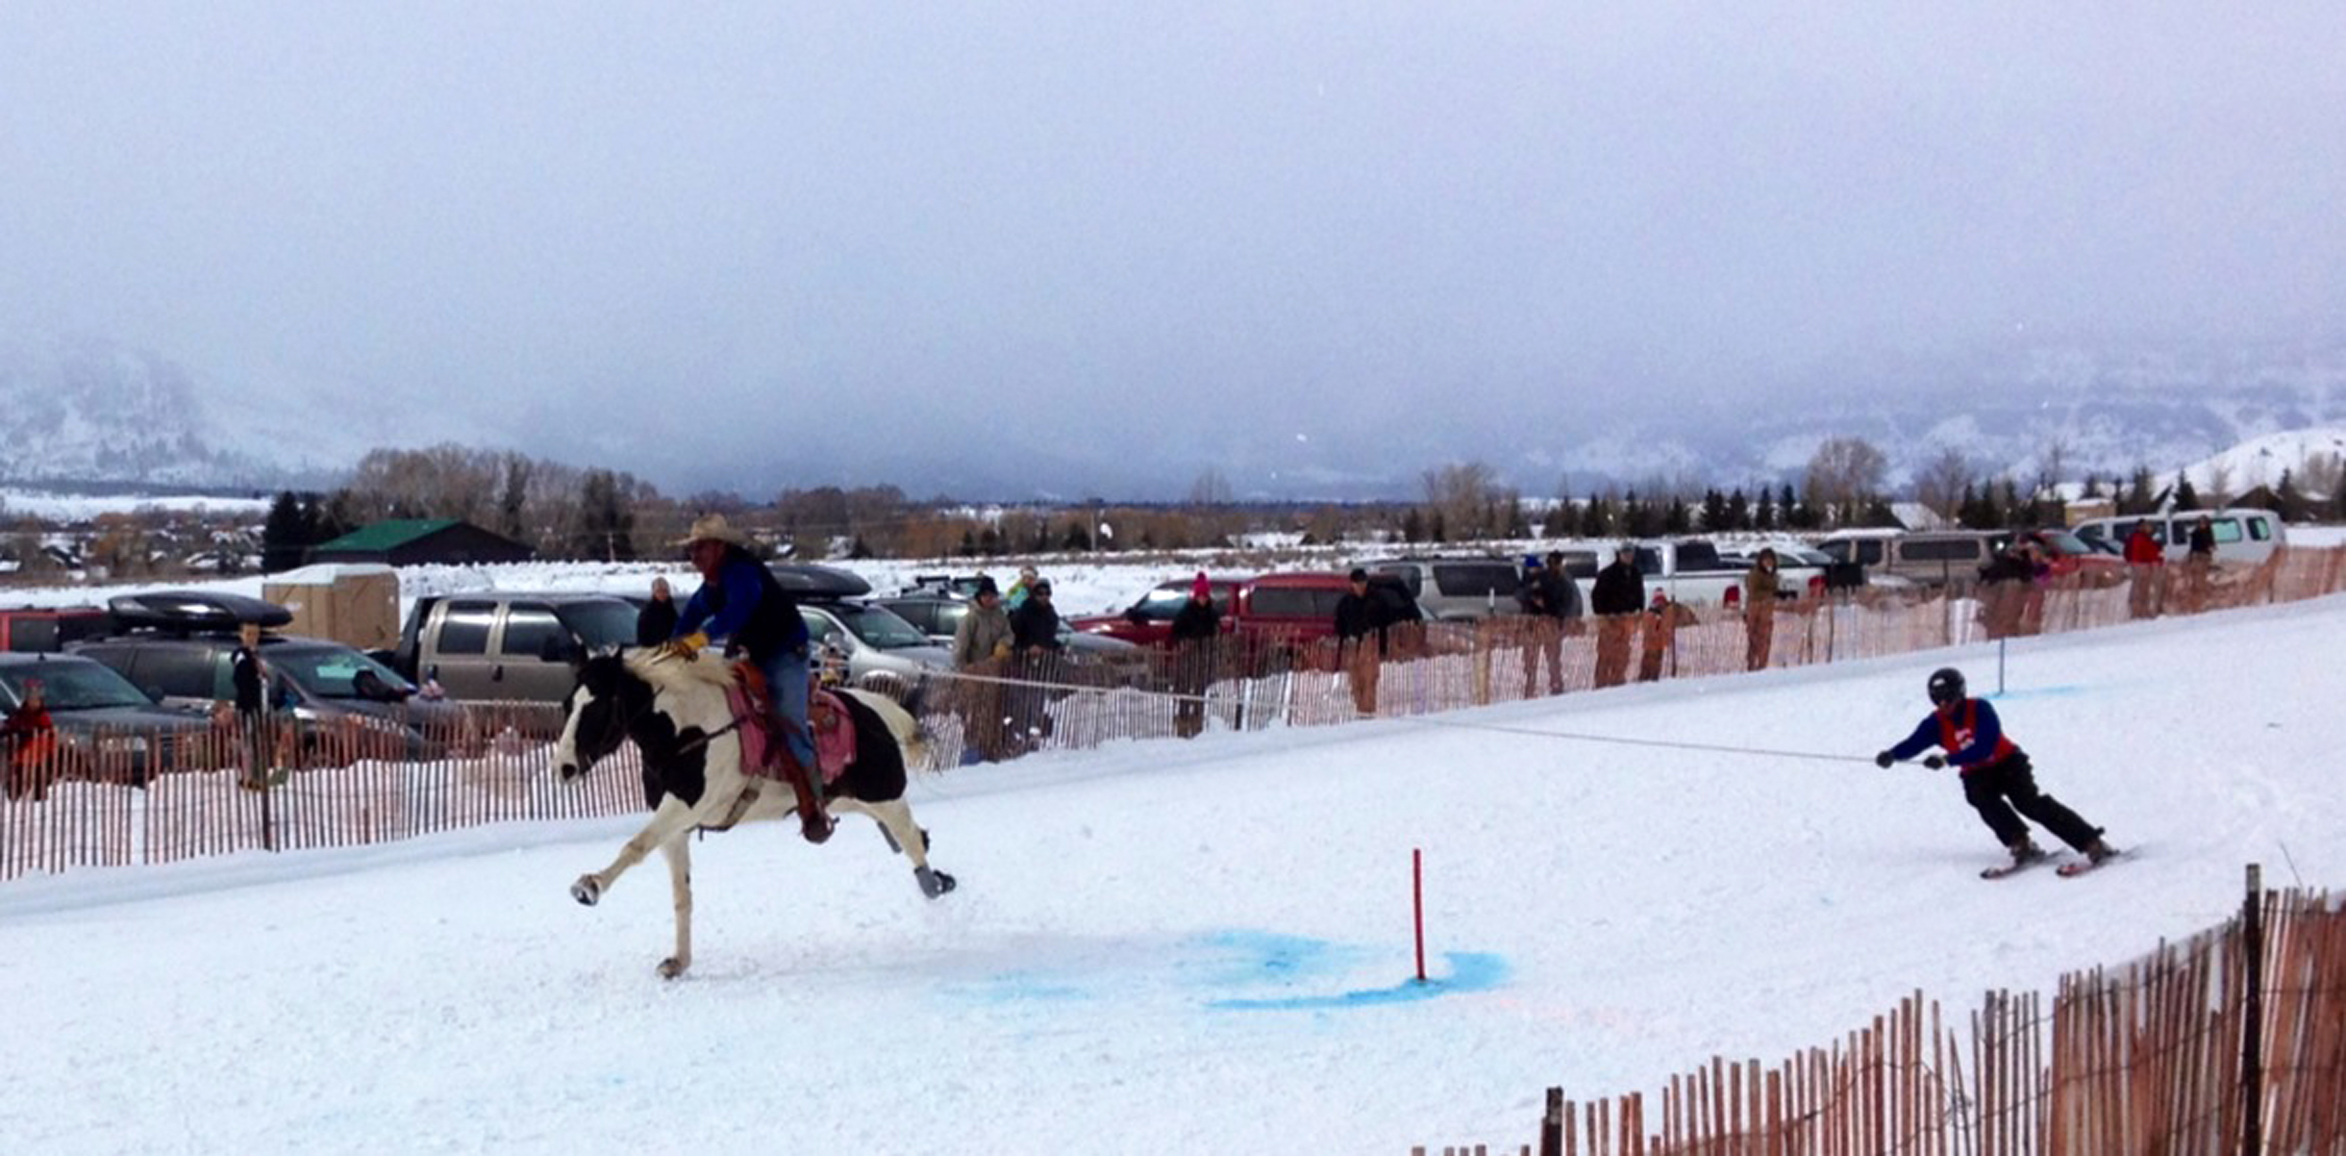 A skijoring athlete rounds a turn at Melody Ranch in one of several WinterFest horse events in Jackson Hole.